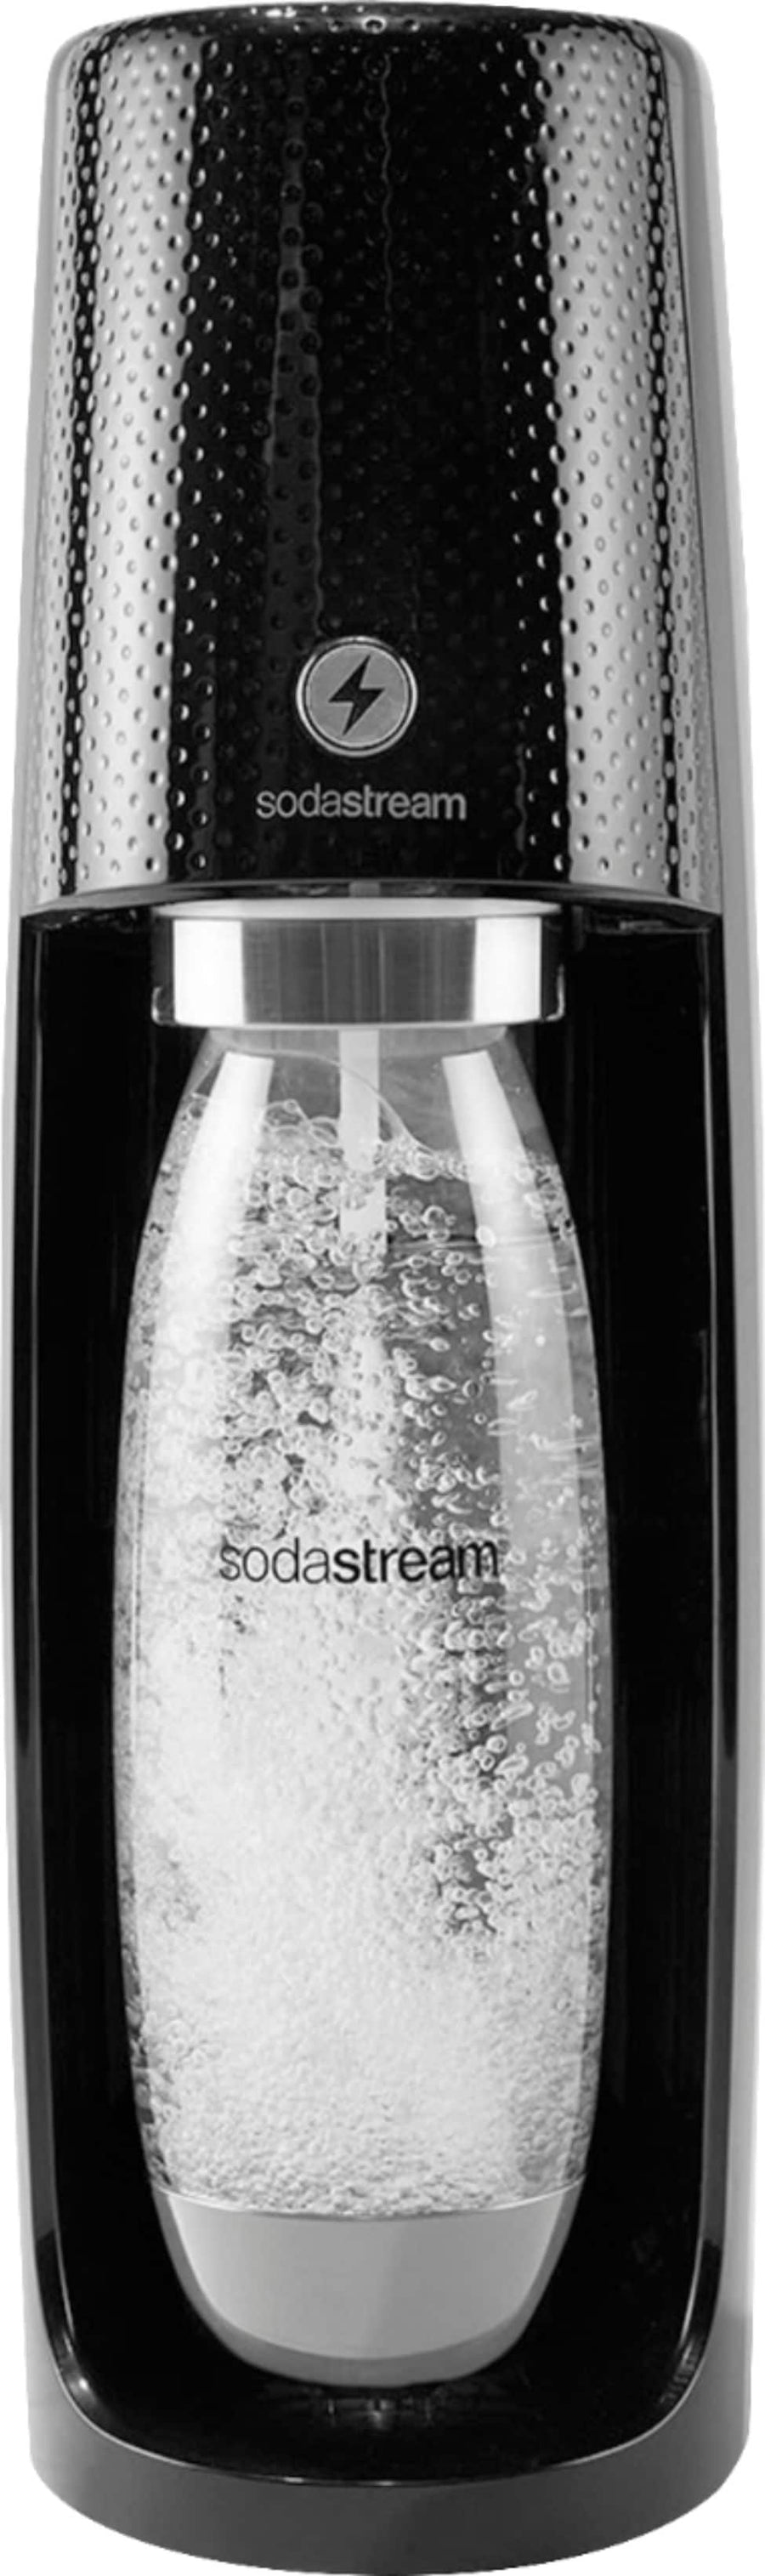 SodaStream - Fizzi One Touch Sparkling Water Maker Kit - Black_0